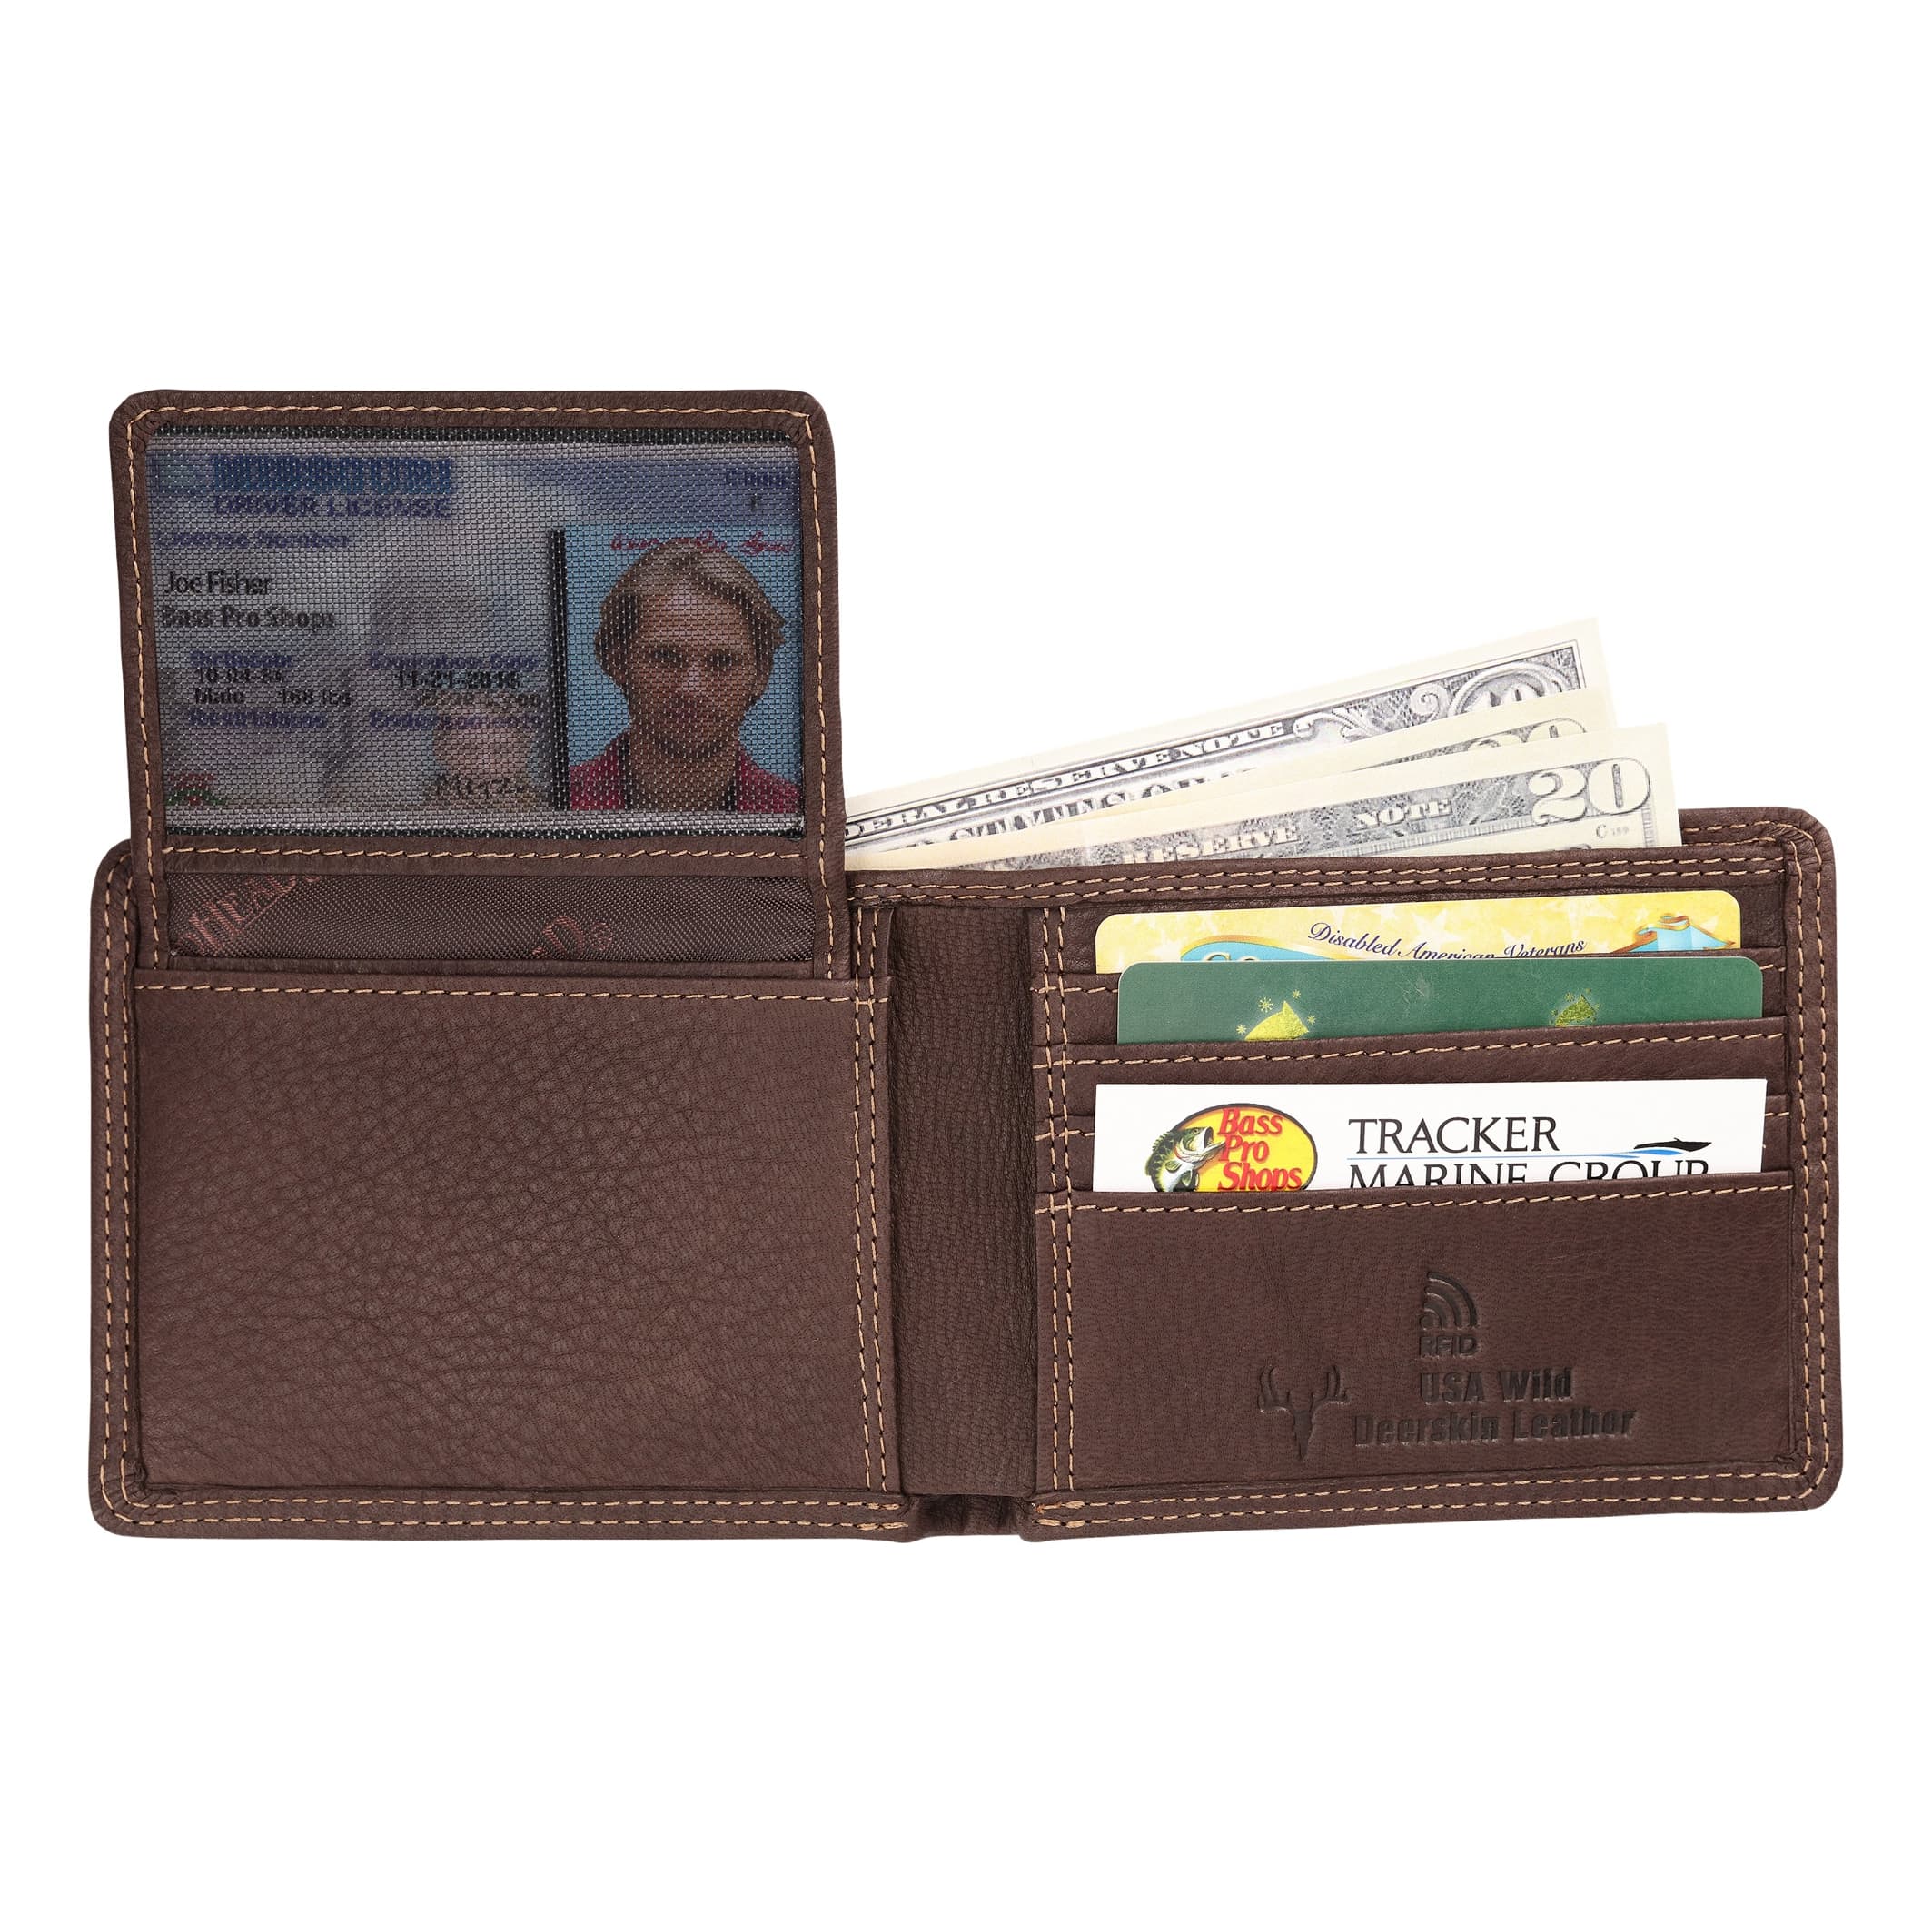 RedHead® Wild Deerskin Leather RFID Wallet - inside (contents not included)